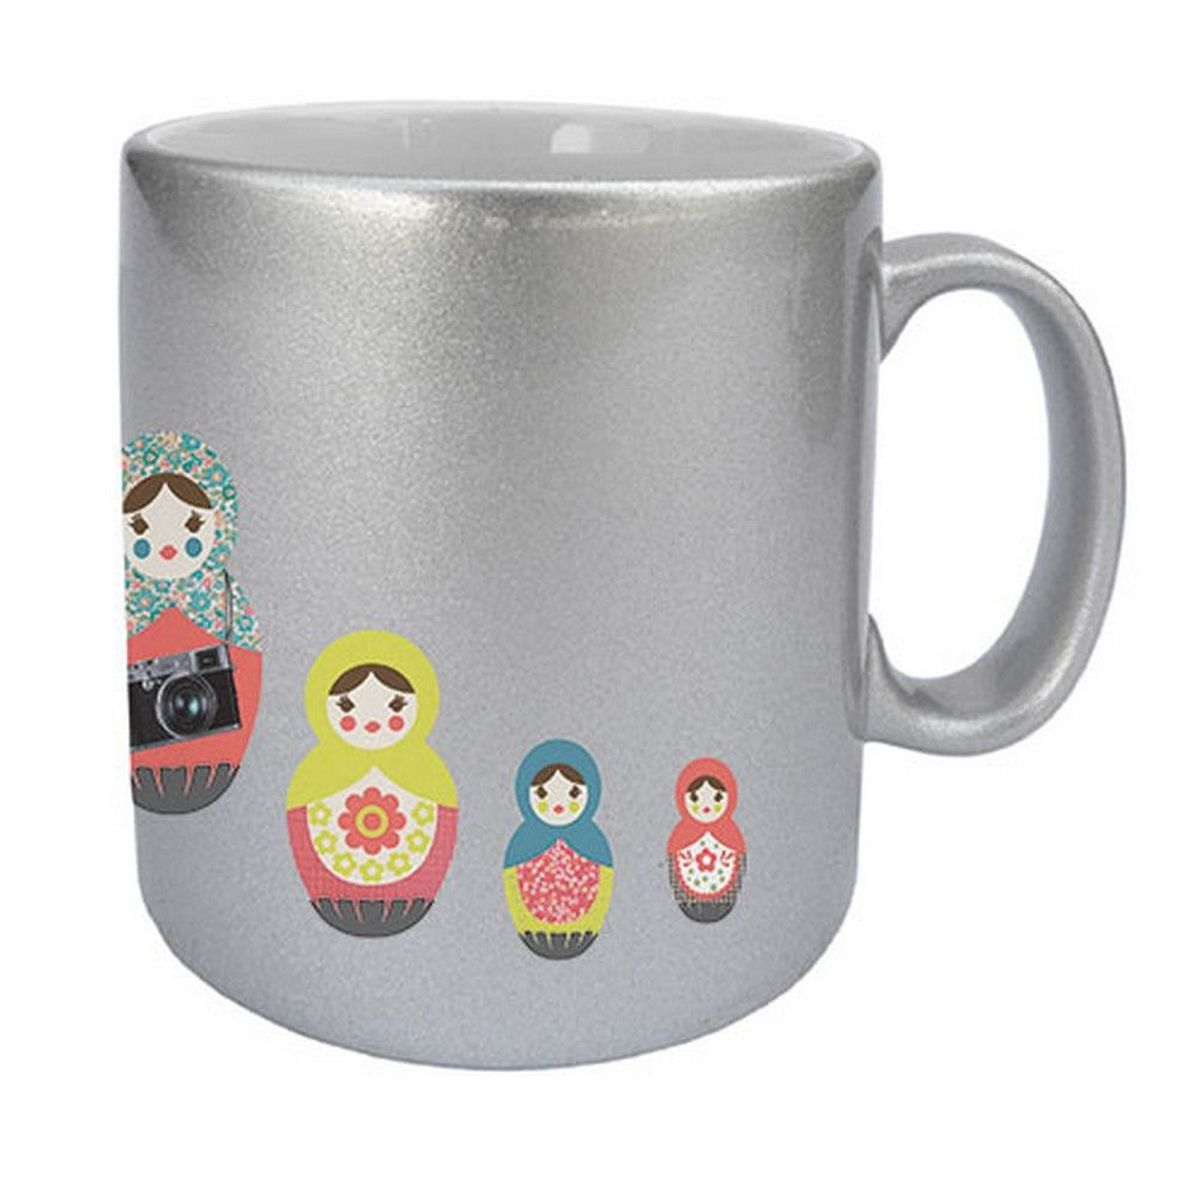 Mug argent Poupes russes by Cbkreation